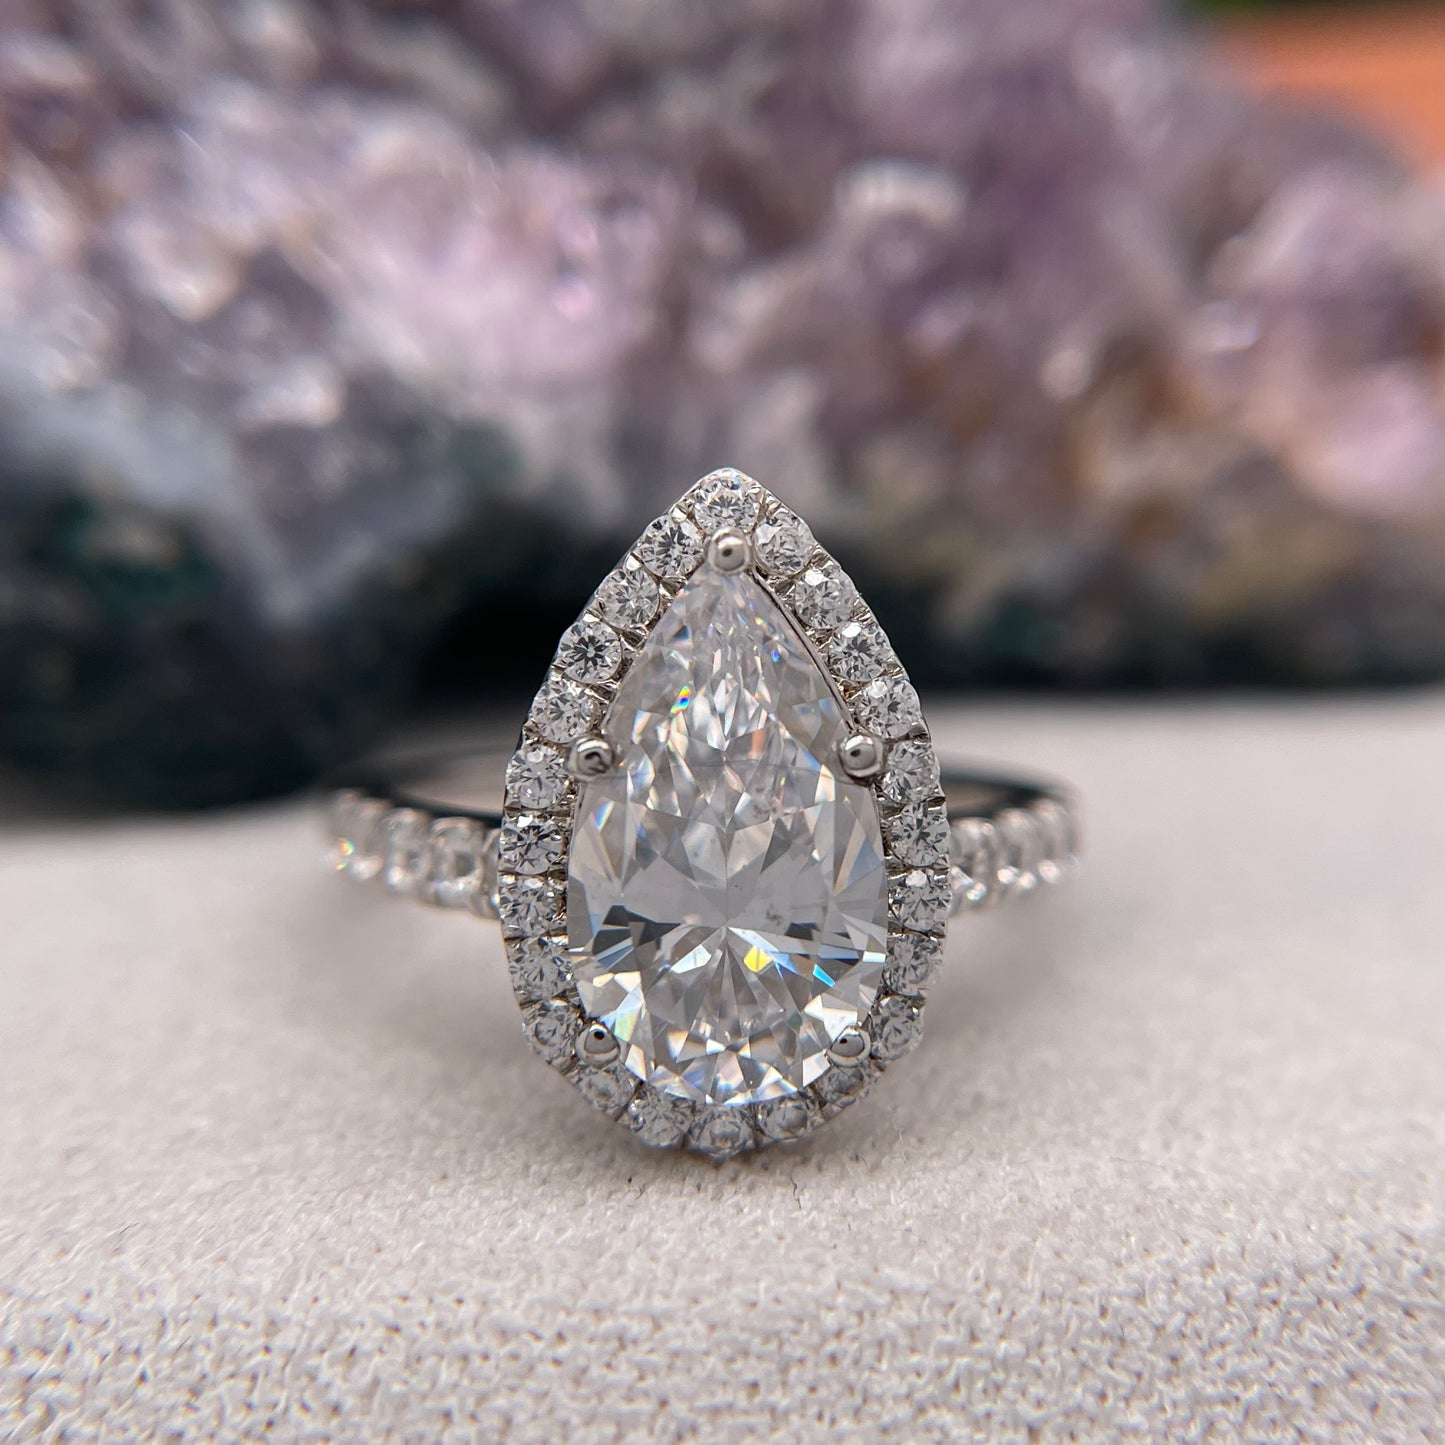 0.50 Carat Pear Shape Brilliant Engagement Ring CENTER STONE Is NOT Included